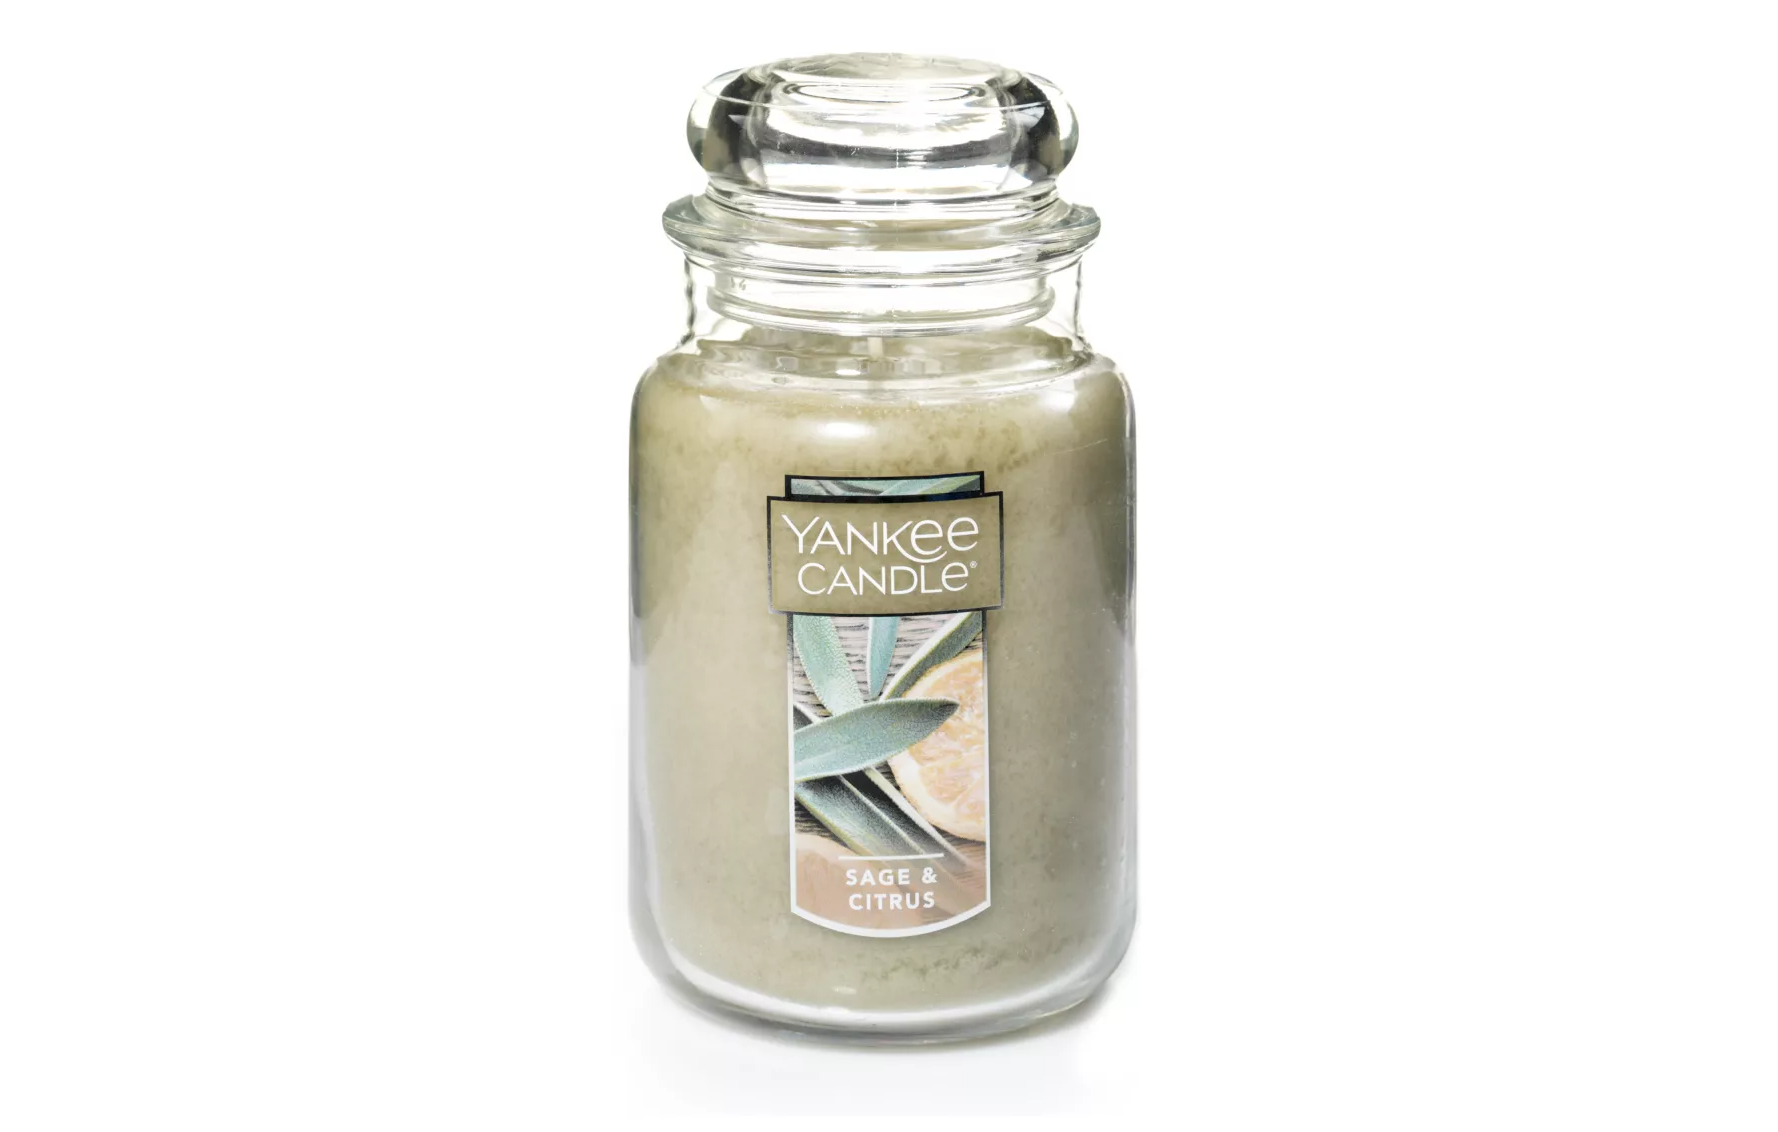 Yankee Candle Black Friday Sale: Buy 3, Get 3 Free Almost Everything + 50% Off Personalized Candles + Free Shipping on $50+ Orders